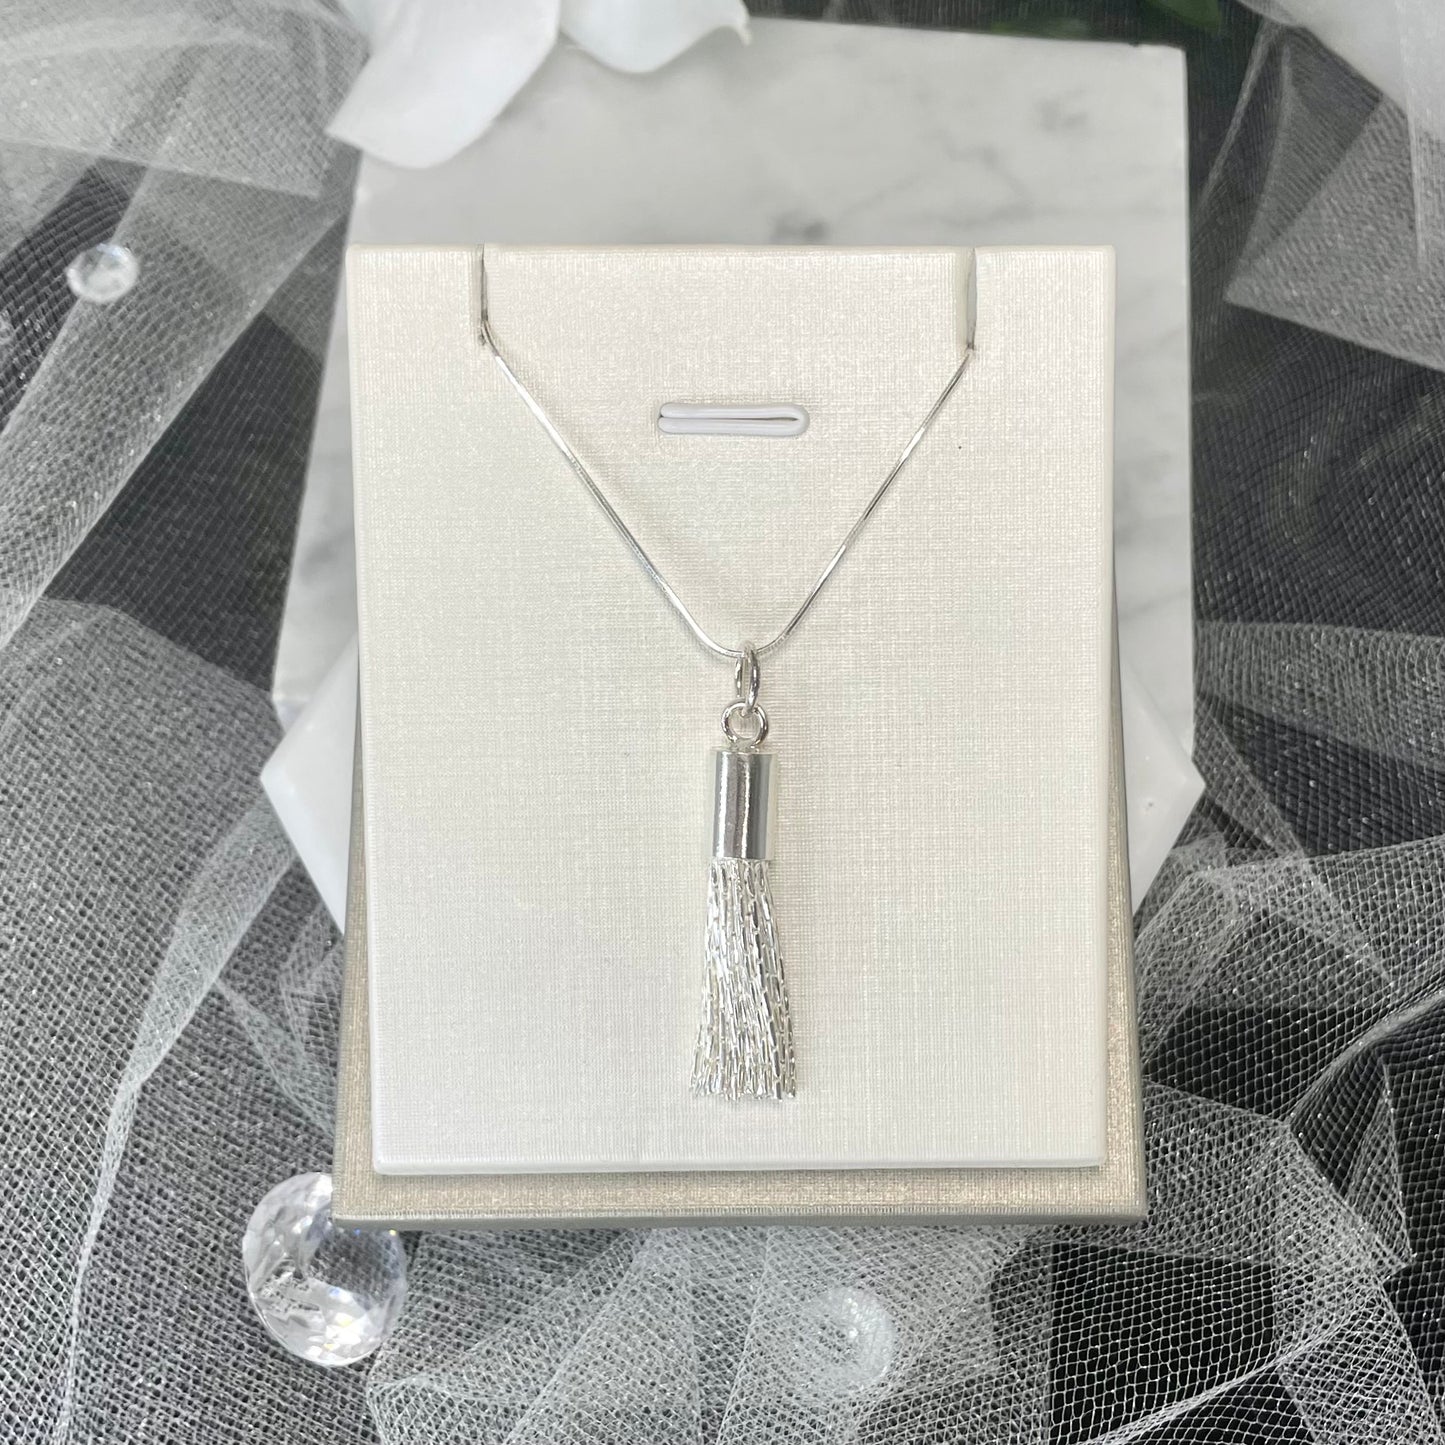 Merrily Silver Necklace